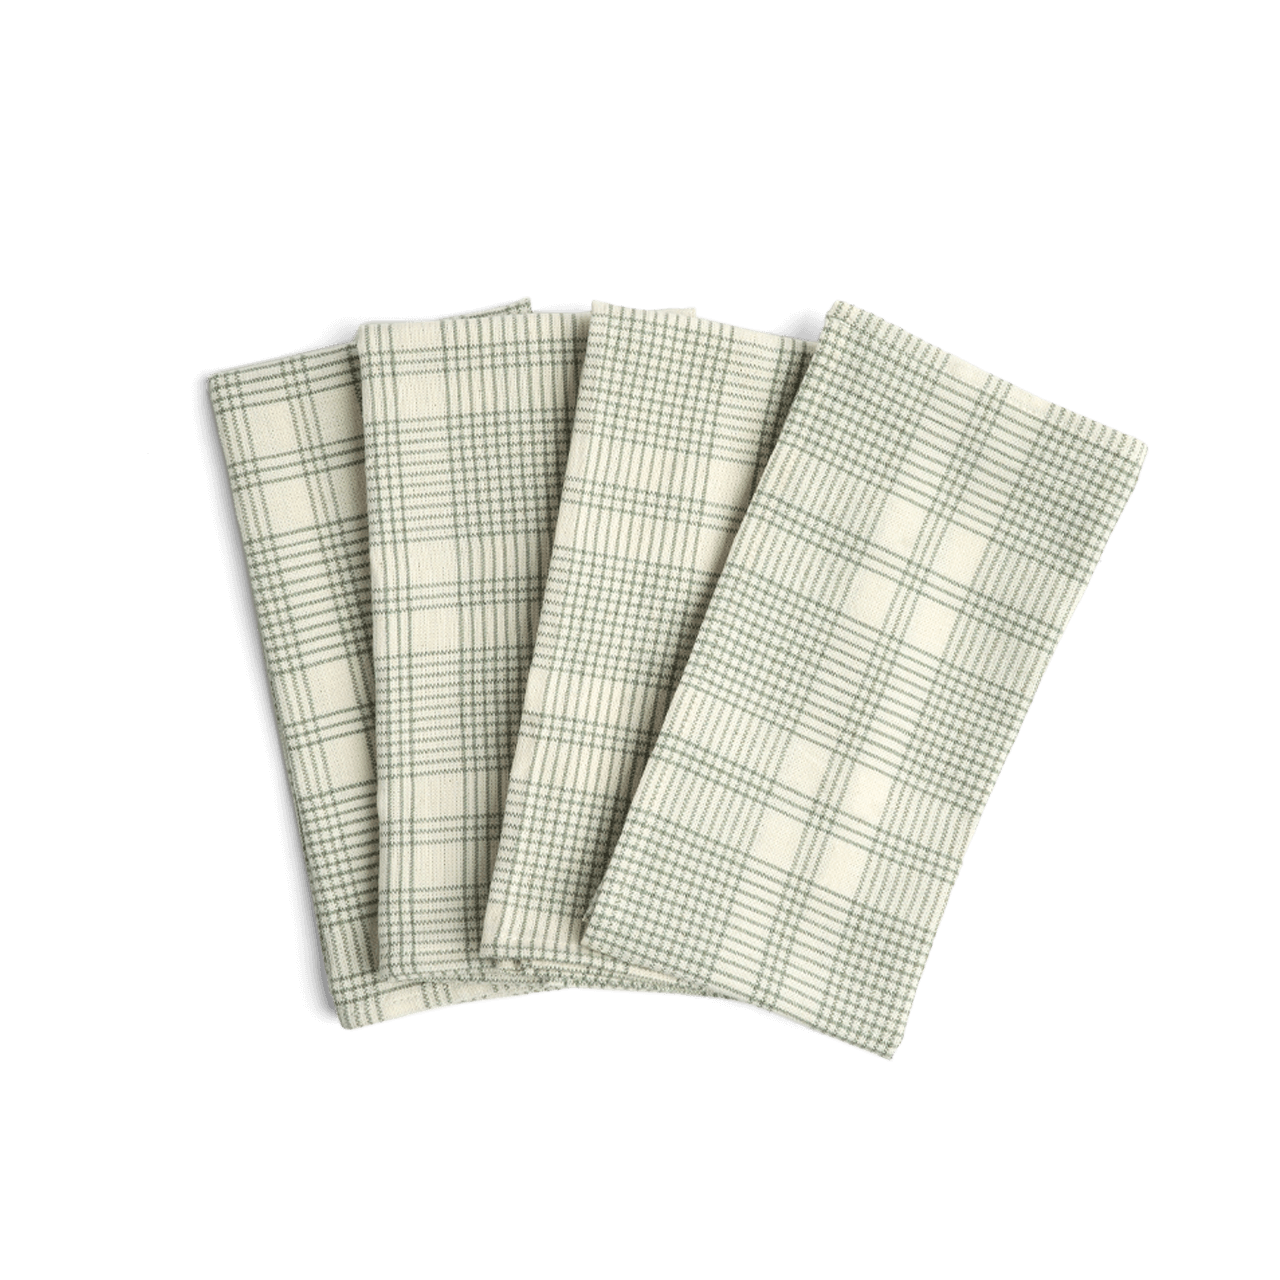 Set of 4 Sage Green and White Checkered Rectangular Dish Towels 28